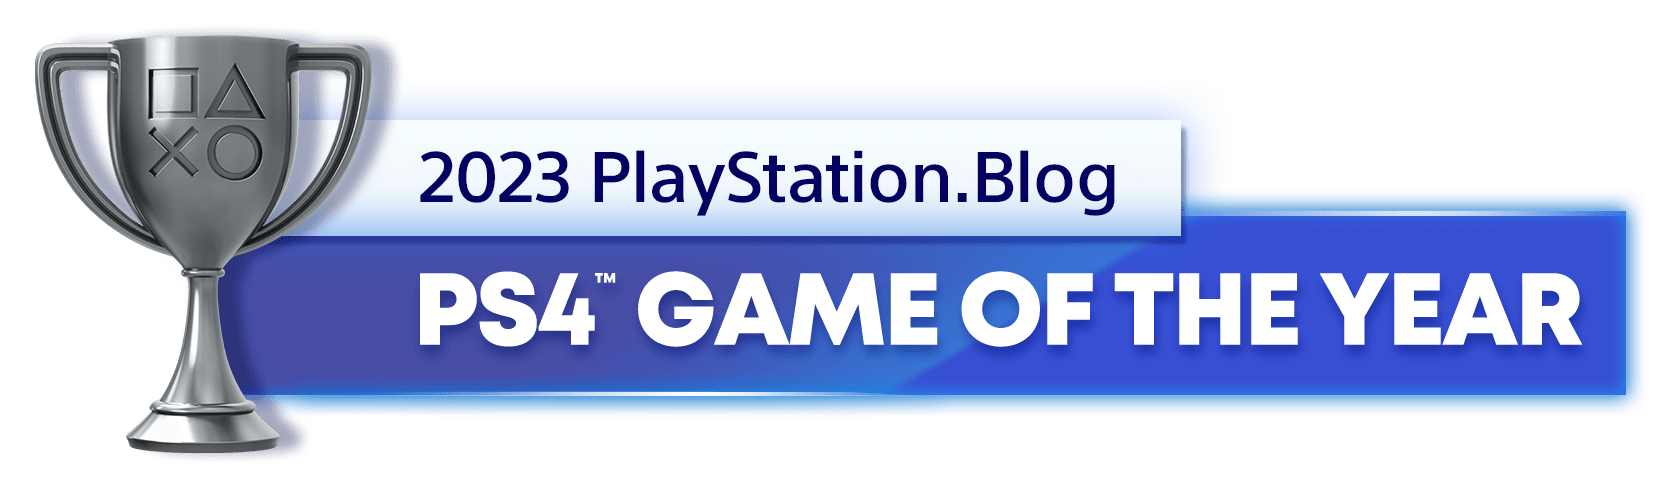 Silver Trophy for the 2023 PlayStation Blog PS4 Game of the Year Winner